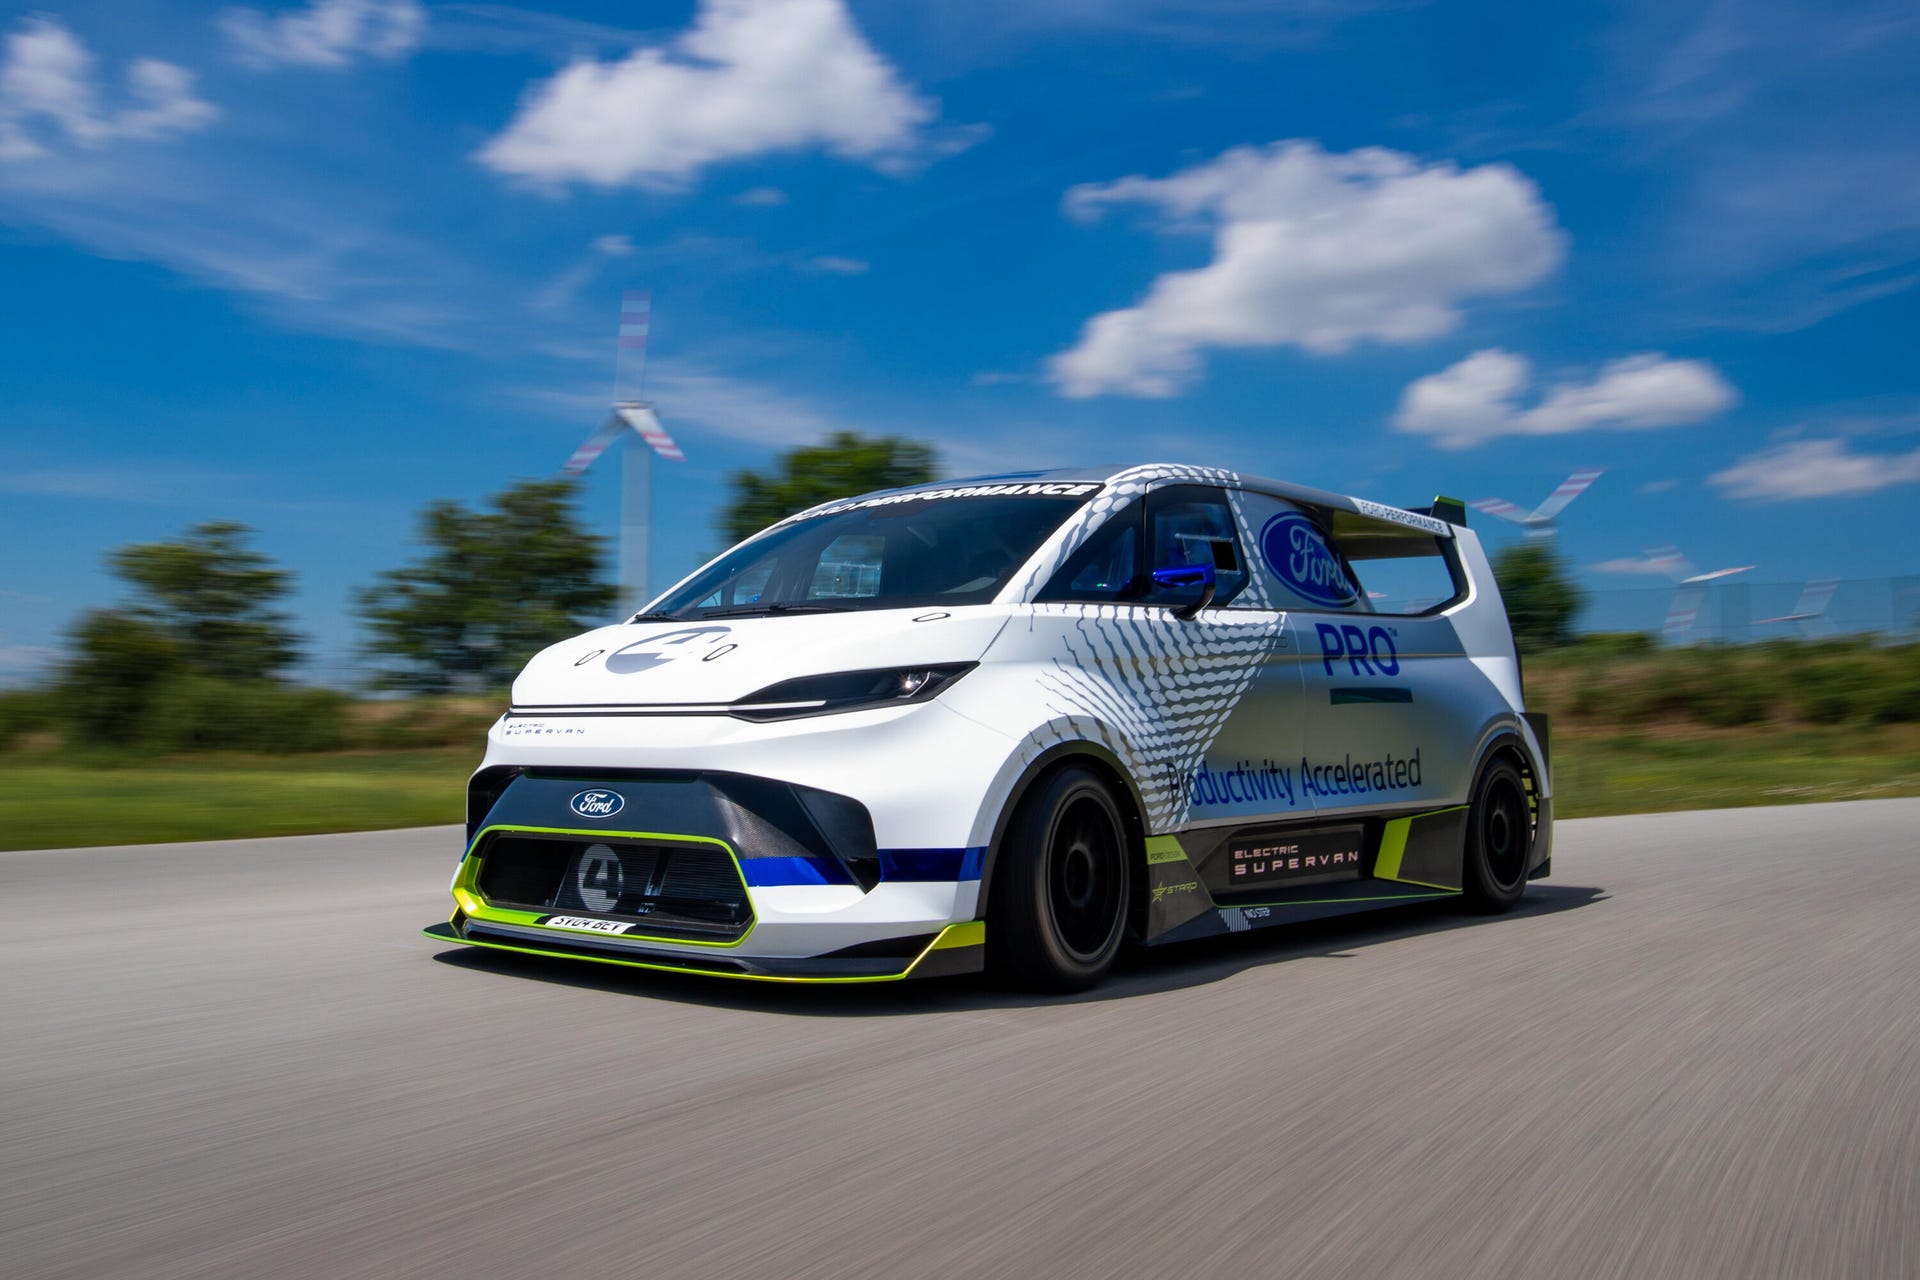 Ford Pro Electric SuperVan Transit race car in motion outdoors